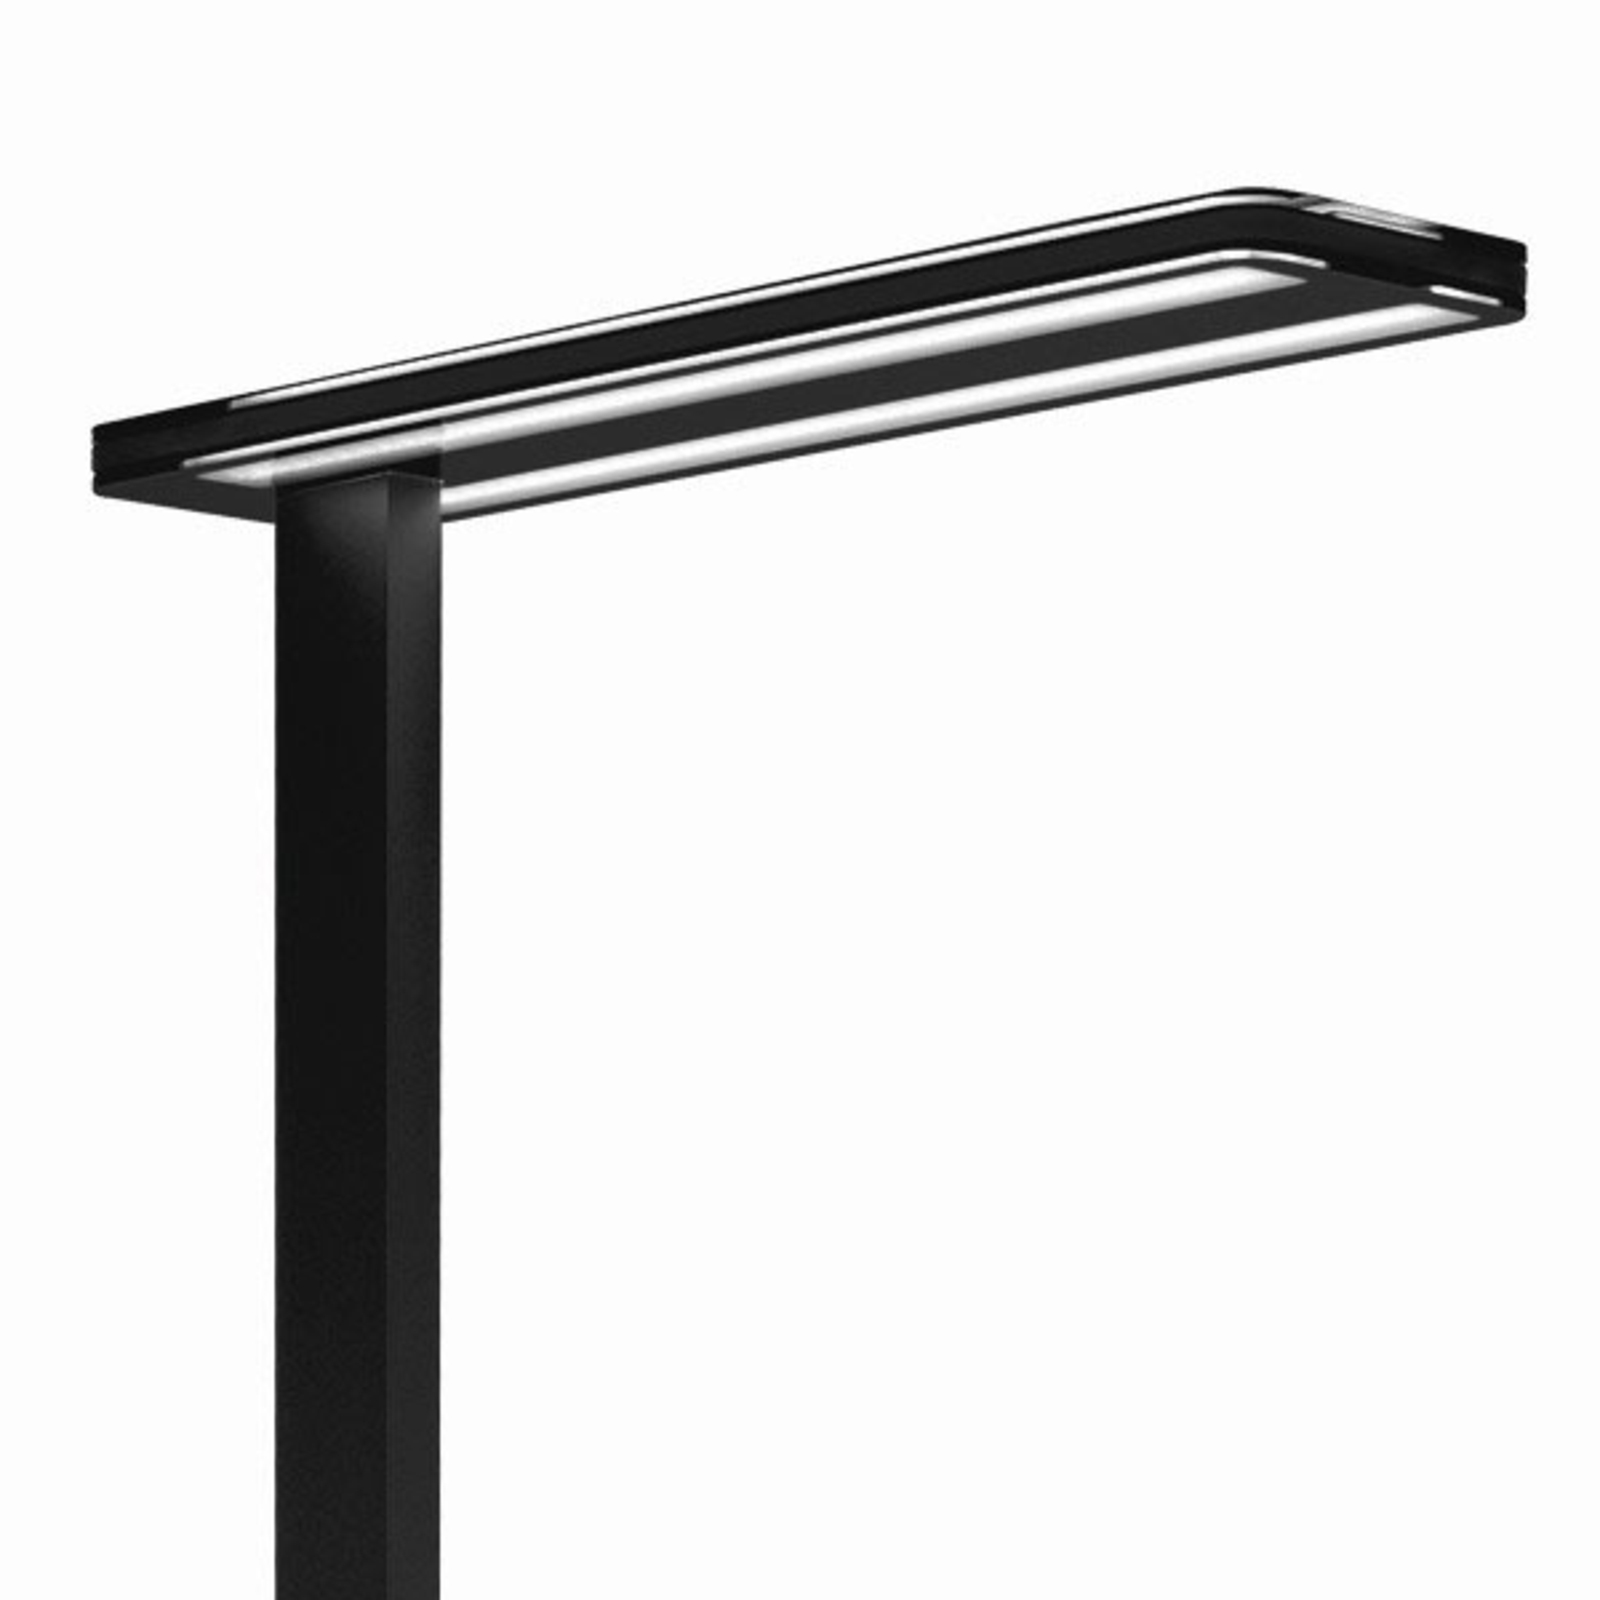 Lampadaire LED Trentino II, dimmable, noir